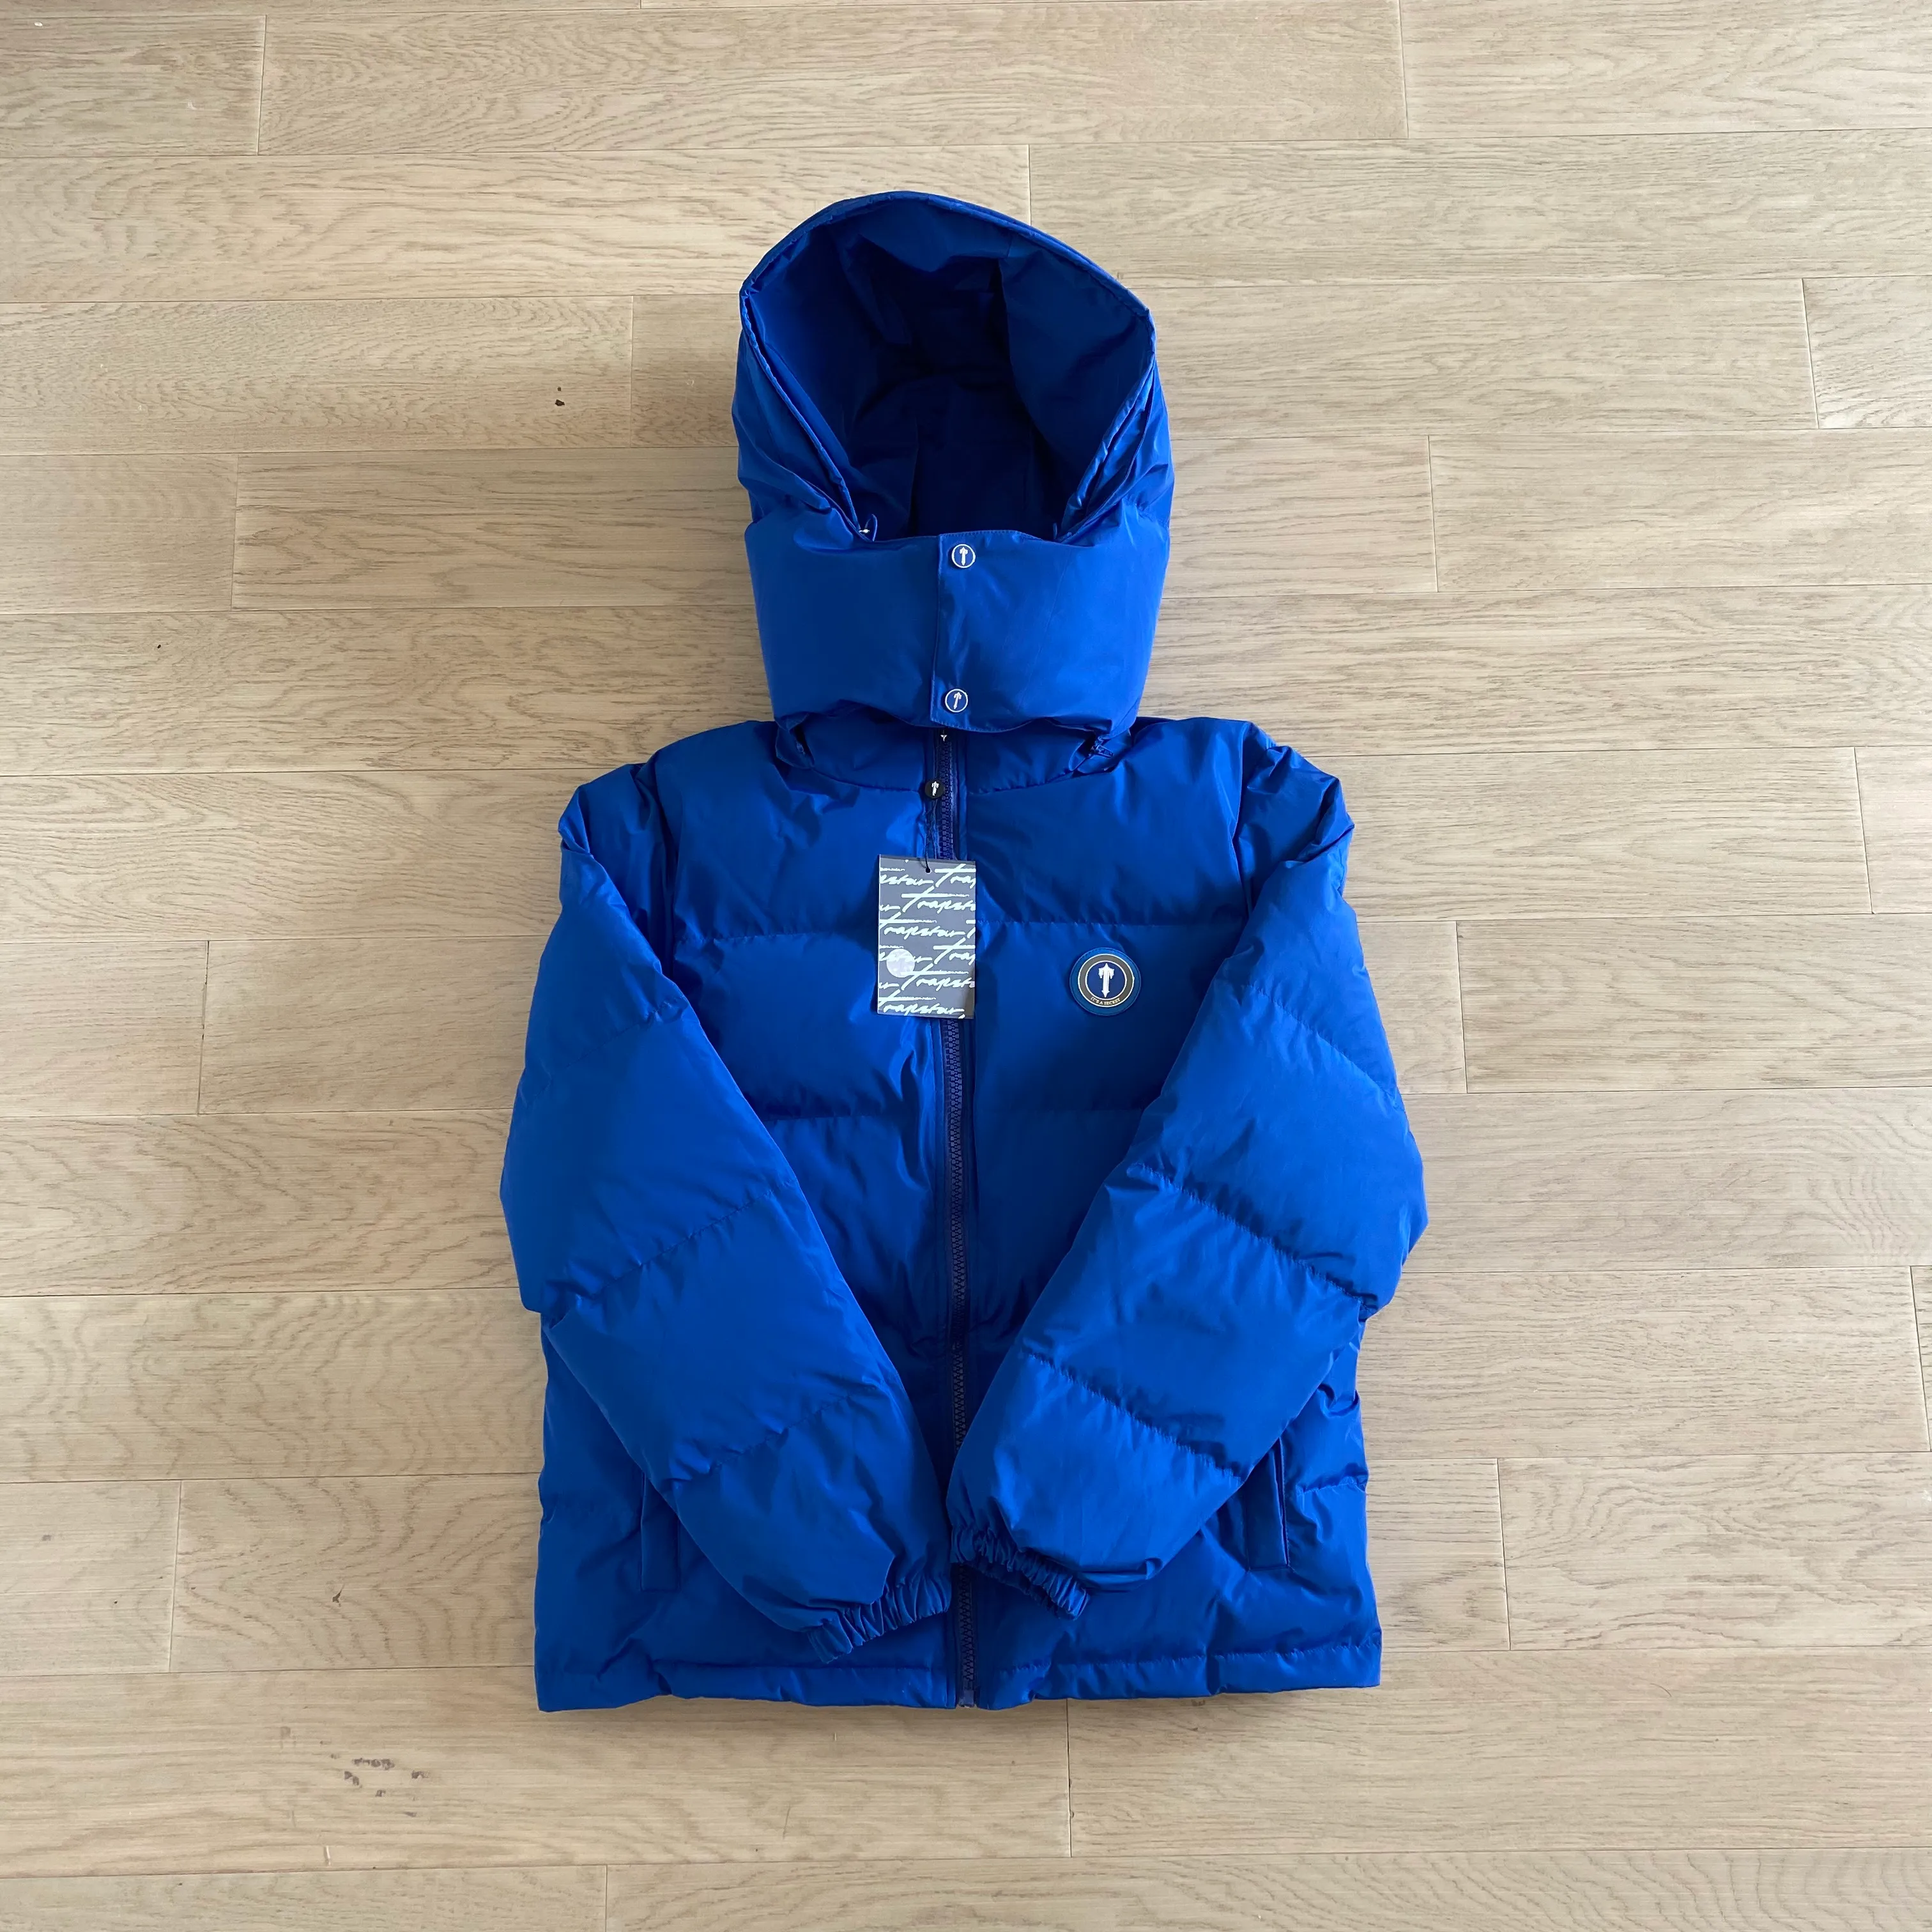 Trapstar Irongate pufferjacket with Detachable Hood (Blue)